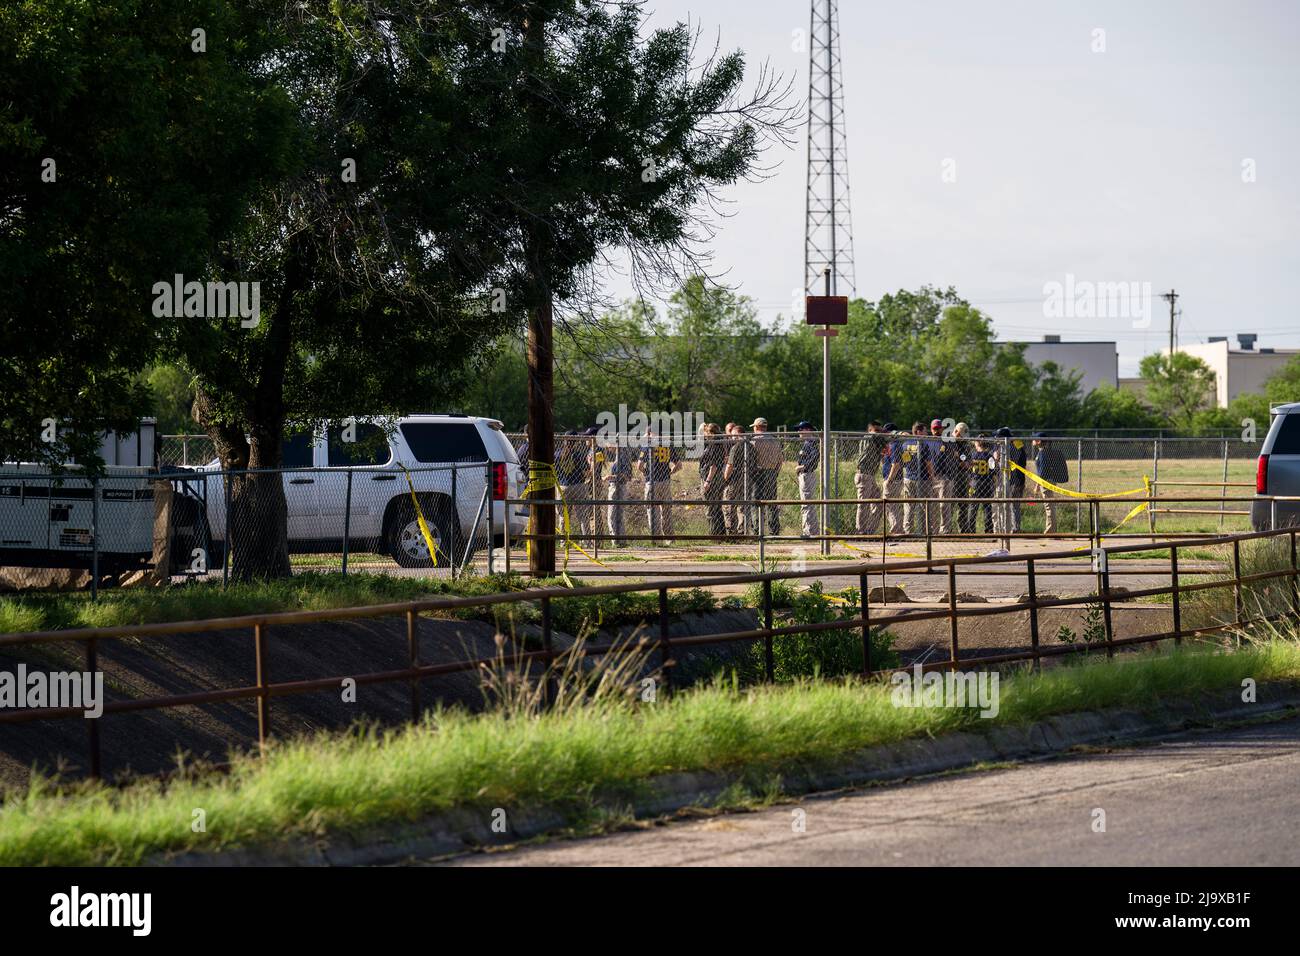 May 24, 2022: Officers with the Federal Bureau of Investigations arrive at Robb Elementary School, the site of a school shooting that left 19 children, two adults and the gunman dead, Wednesday, May 25, 2022. (Credit Image: © Jintak Han/ZUMA Press Wire) Stock Photo